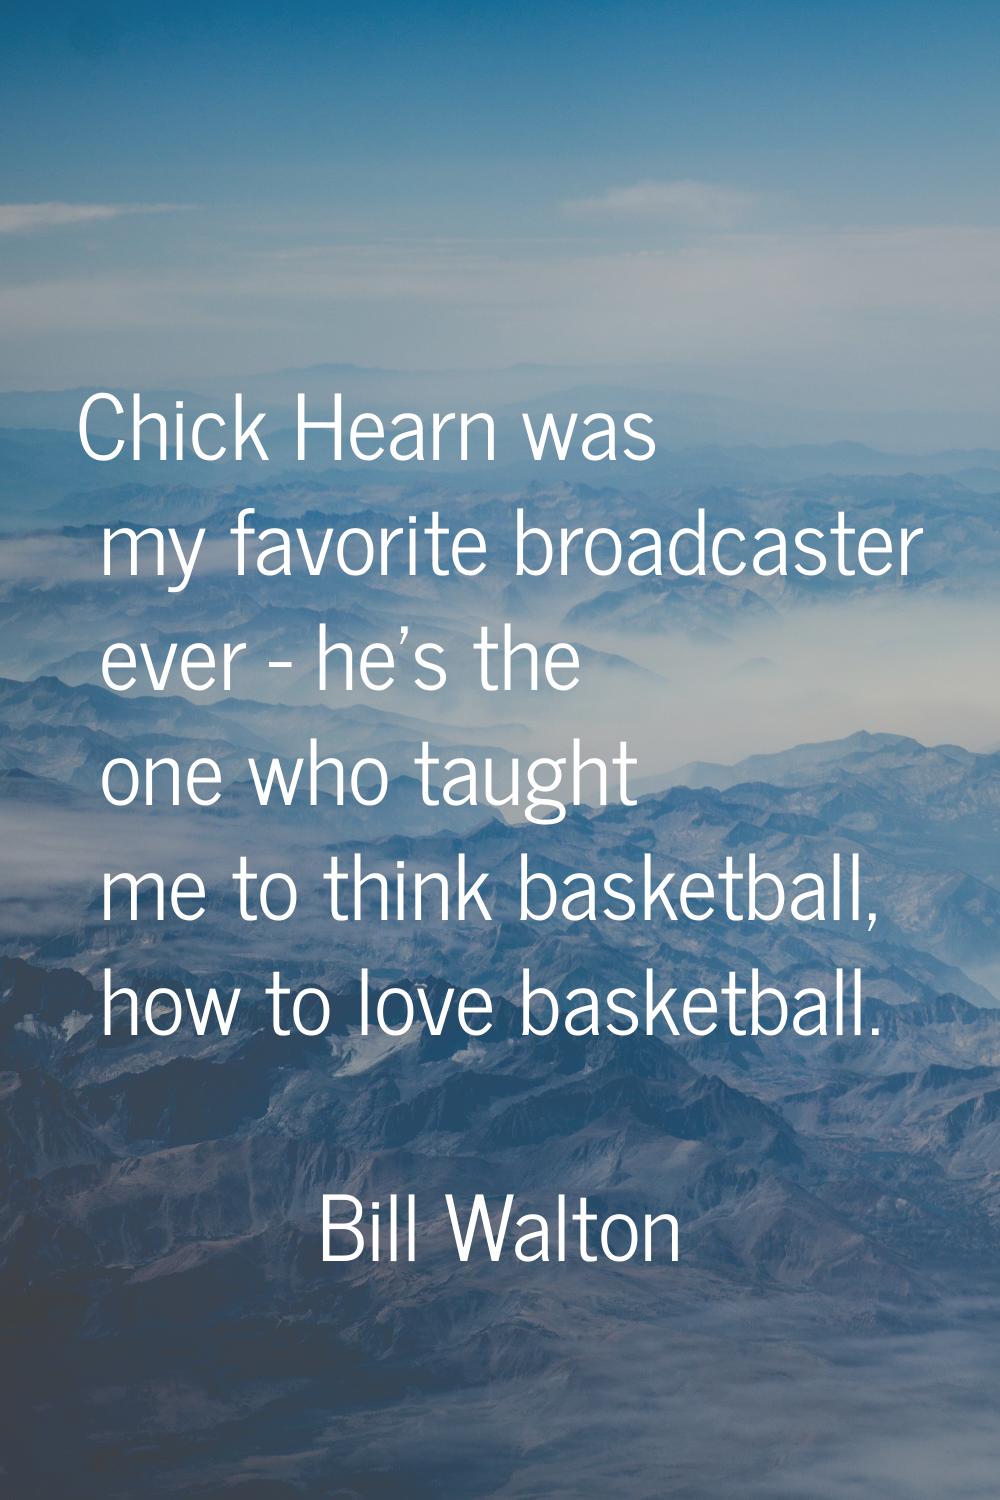 Chick Hearn was my favorite broadcaster ever - he's the one who taught me to think basketball, how 